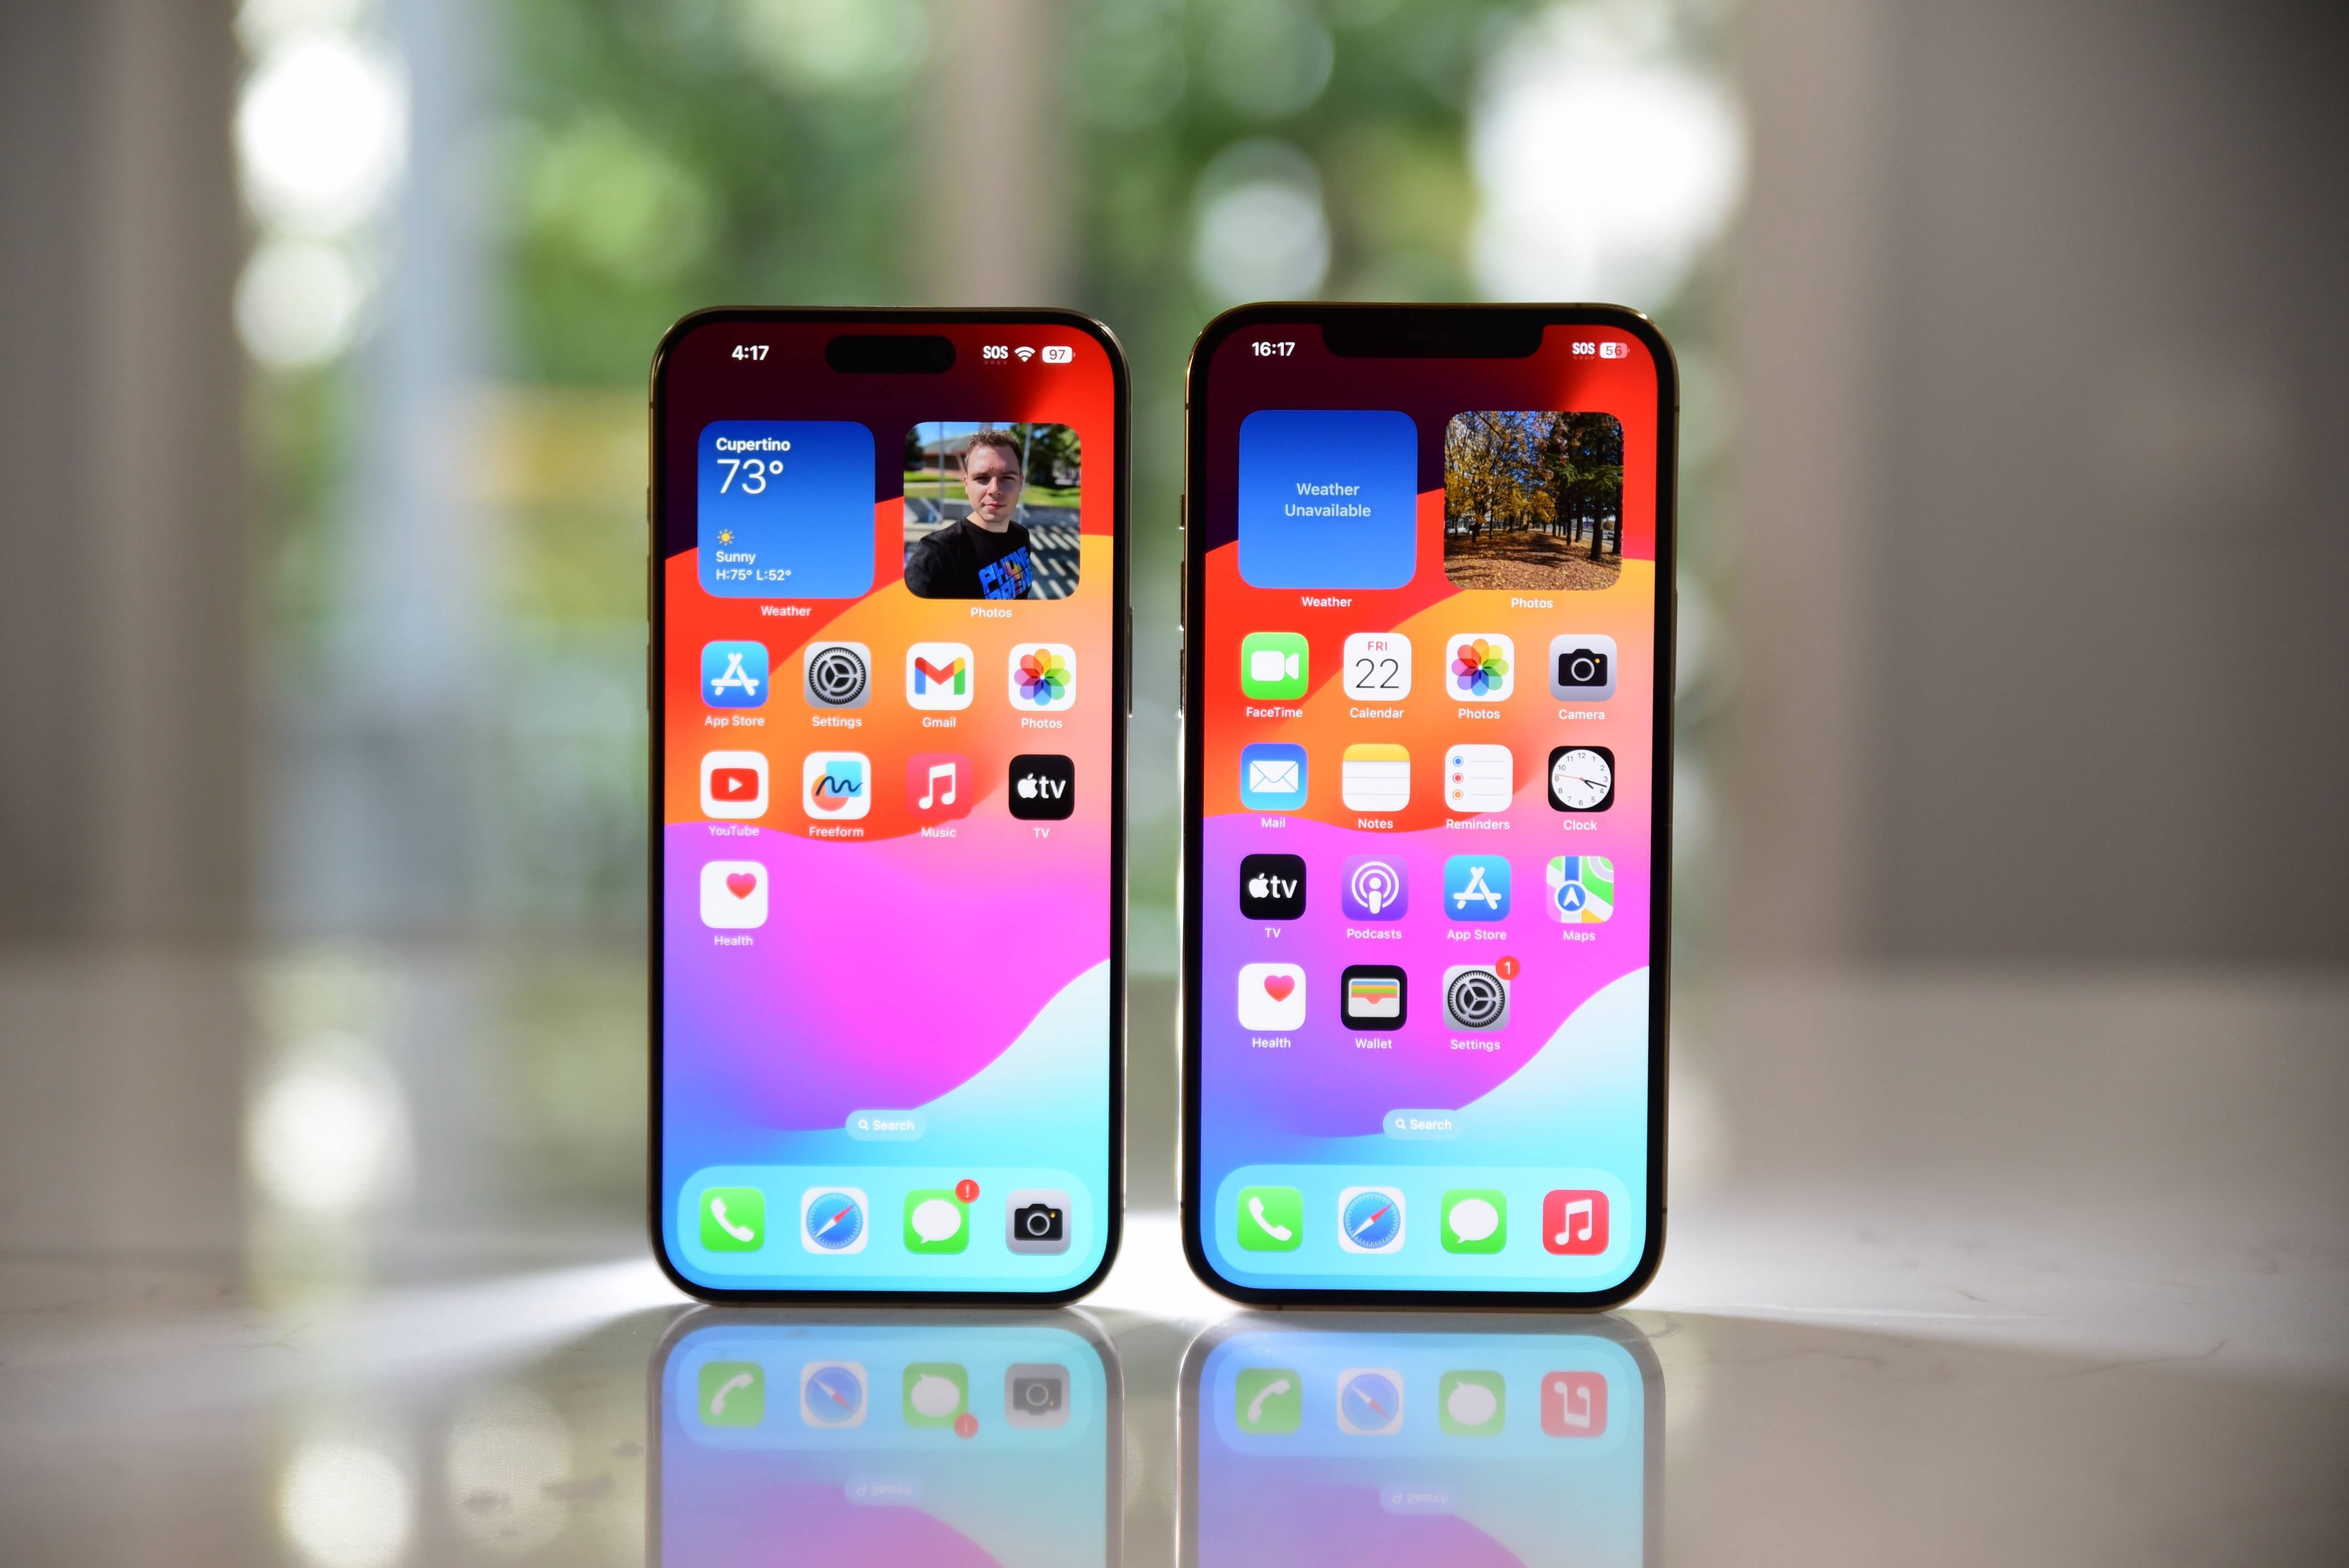 iPhone 15 Pro Max vs iPhone 12 Pro Max - Which Should You Choose? 